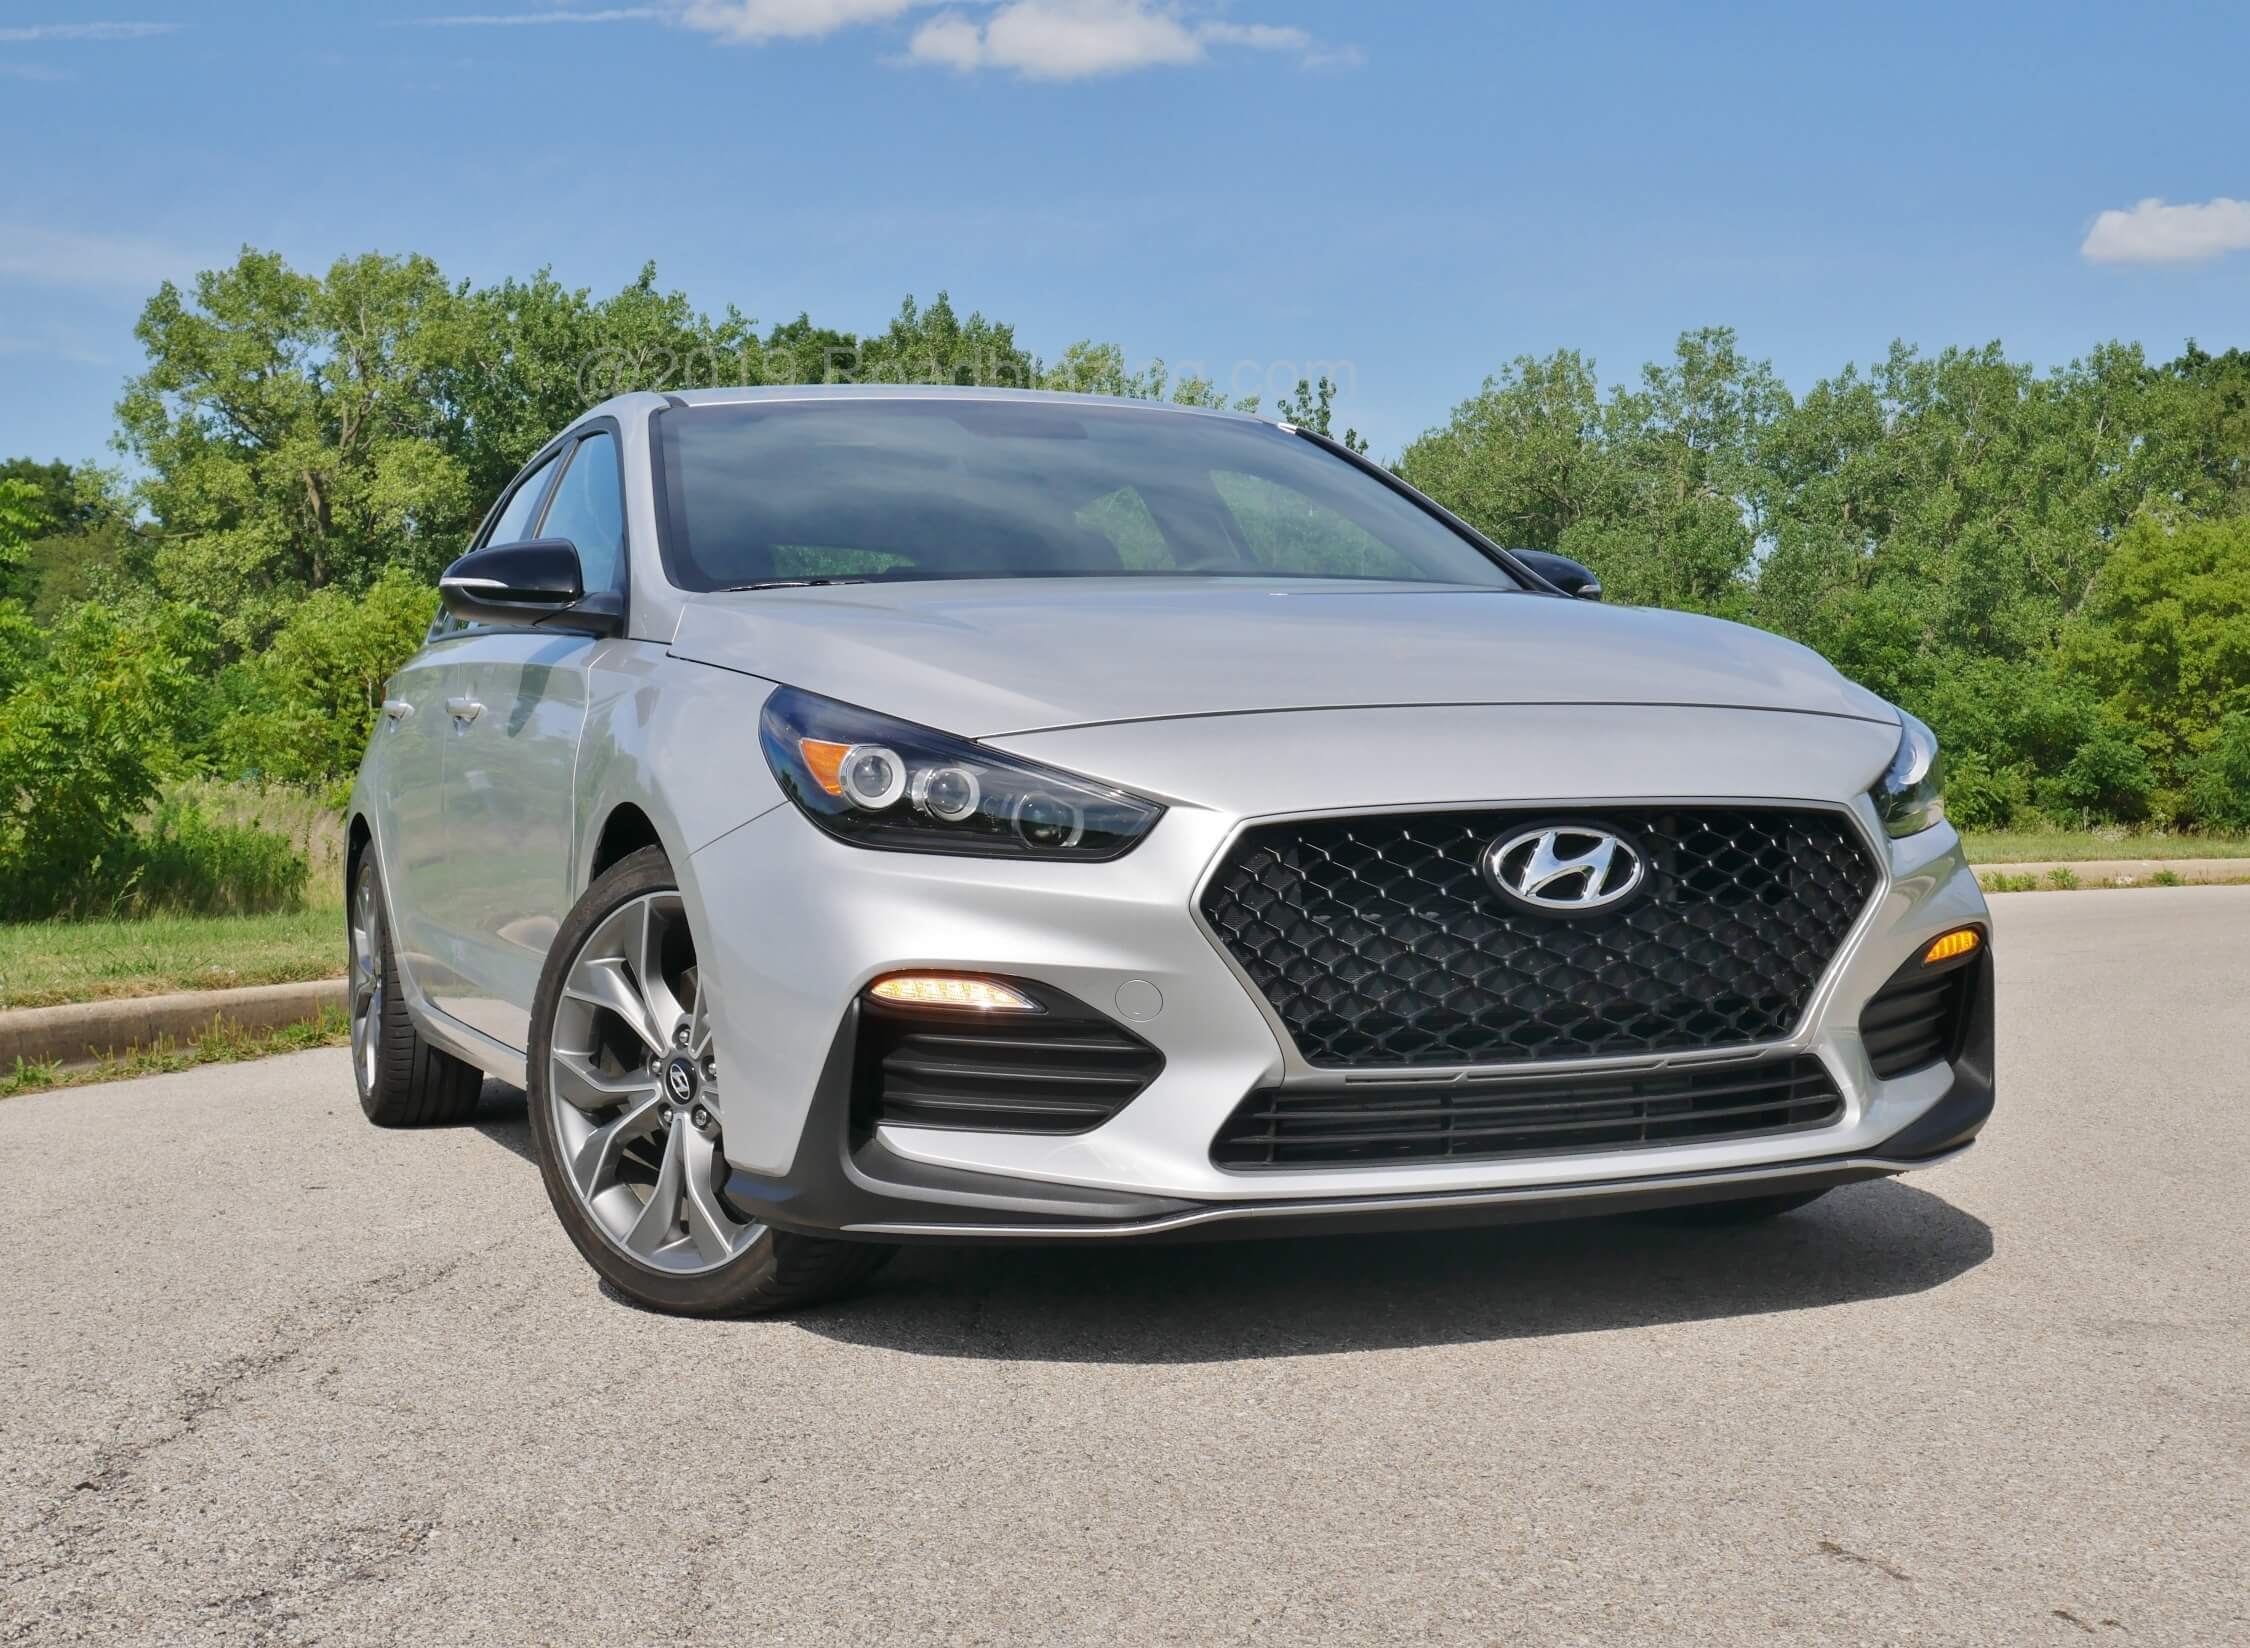 2019 Hyundai Elantra GT N-Line: Dark accenting permeates window frames, mirror caps, pouring molten chain link grille, straked lower front corner housings, and boomerang air dam corners.